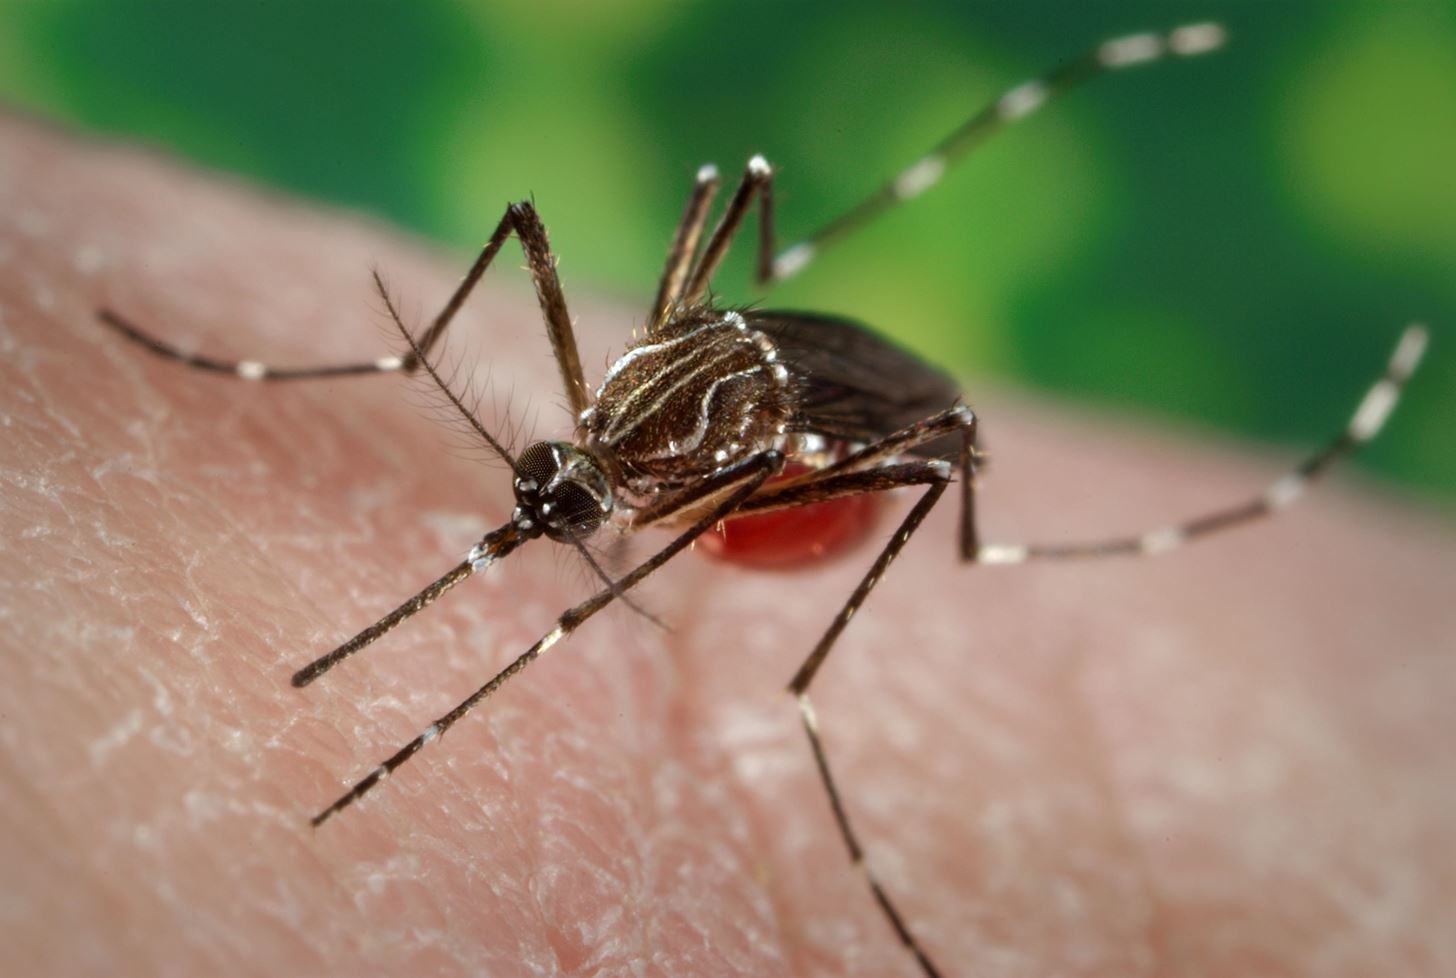 Dangerous Dengue Fever Could Go Worldwide, with Help from Air Travel & Climate Change